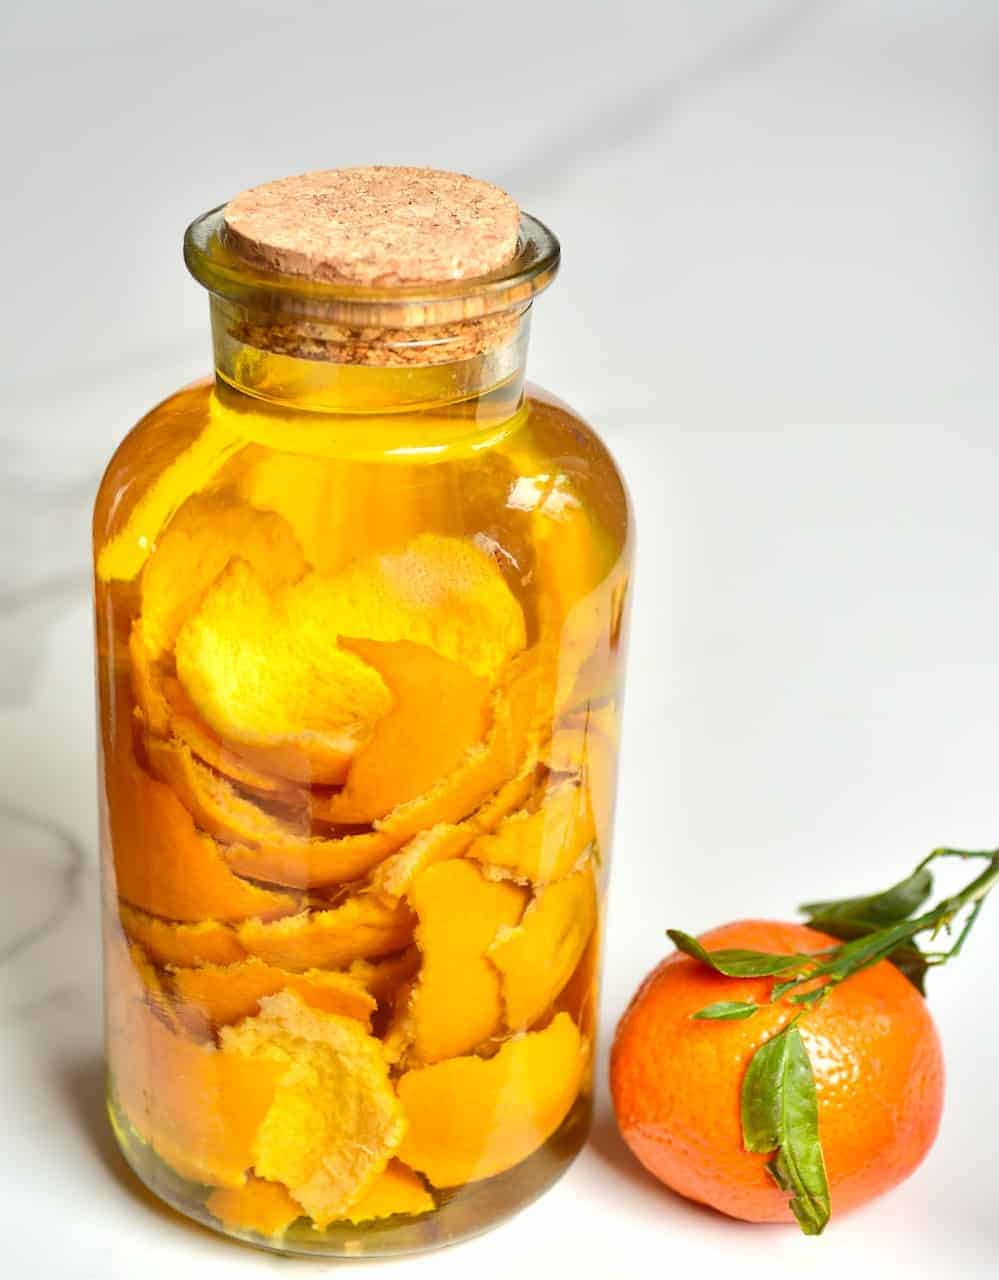 A jar filled with vinegar and citrus peel